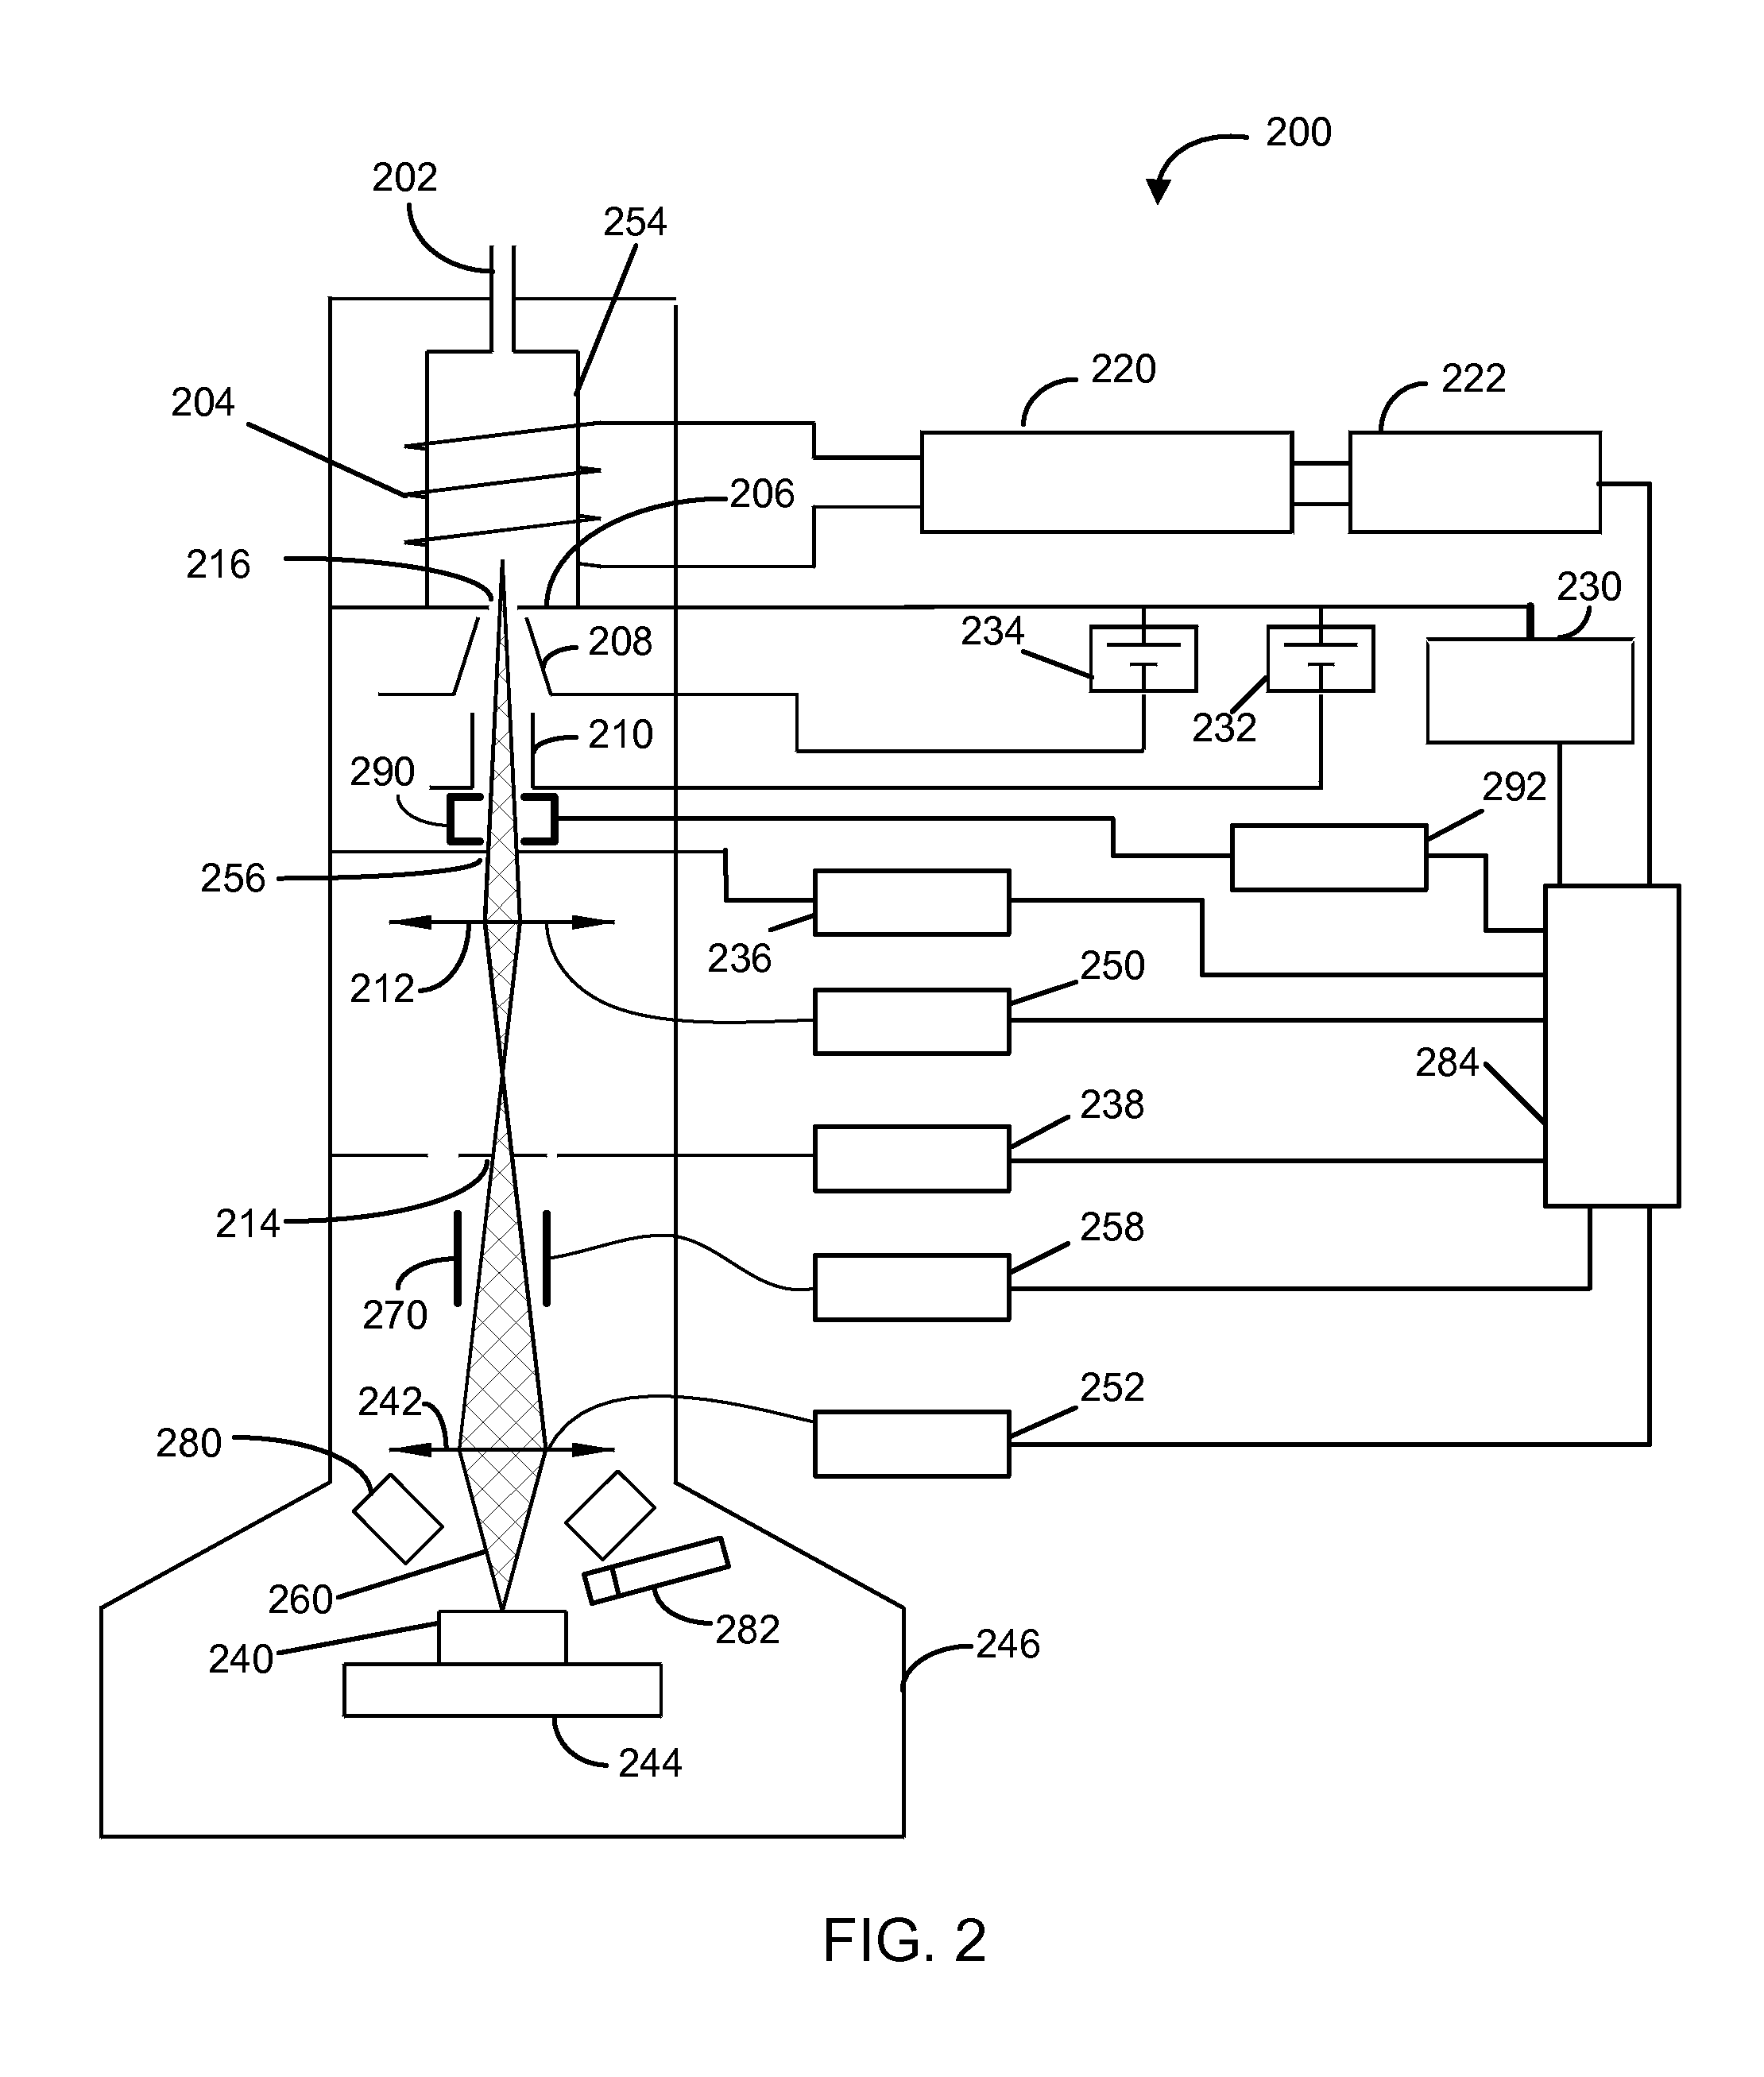 Inductively Coupled Plasma Source as an Electron Beam Source for Spectroscopic Analysis